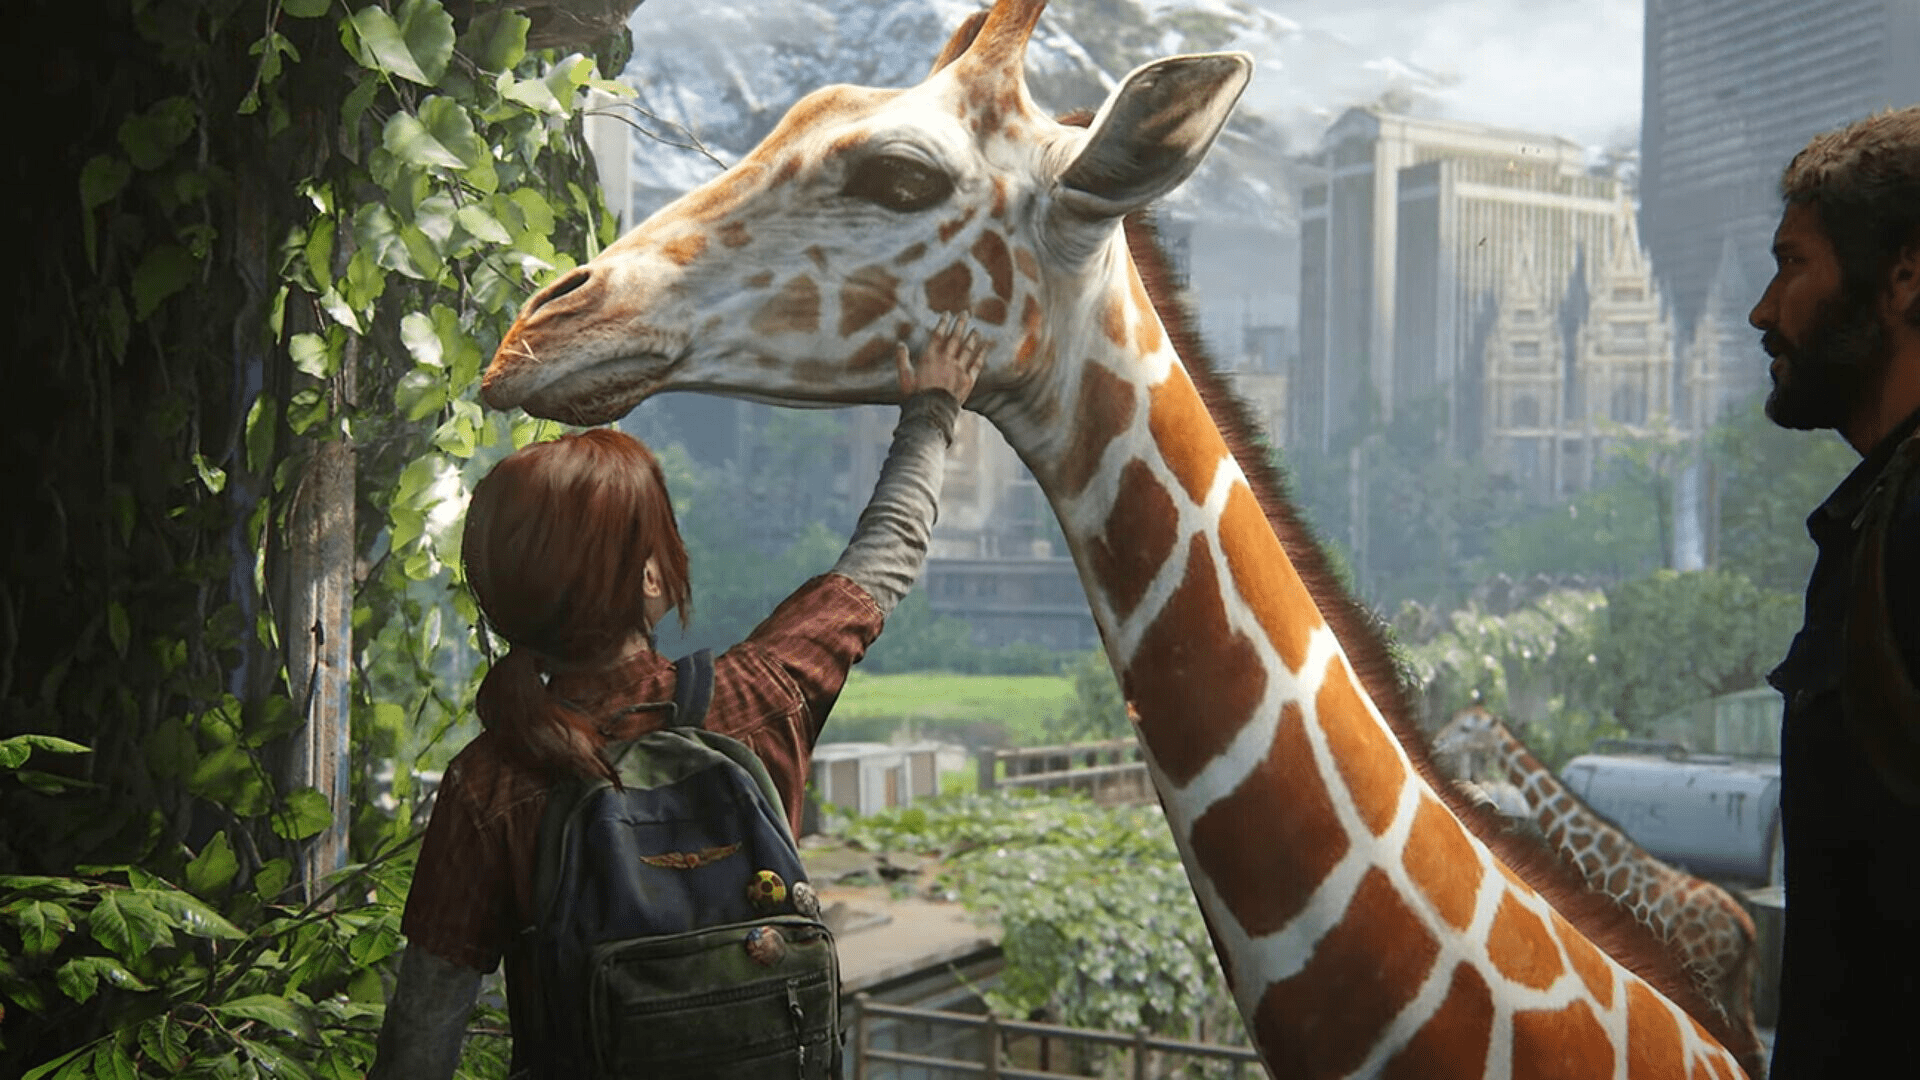 The Last Of Us TV Show Is A Sensation But What Happens In The Last Of Us Video Game? - The Last Of Us Video Game